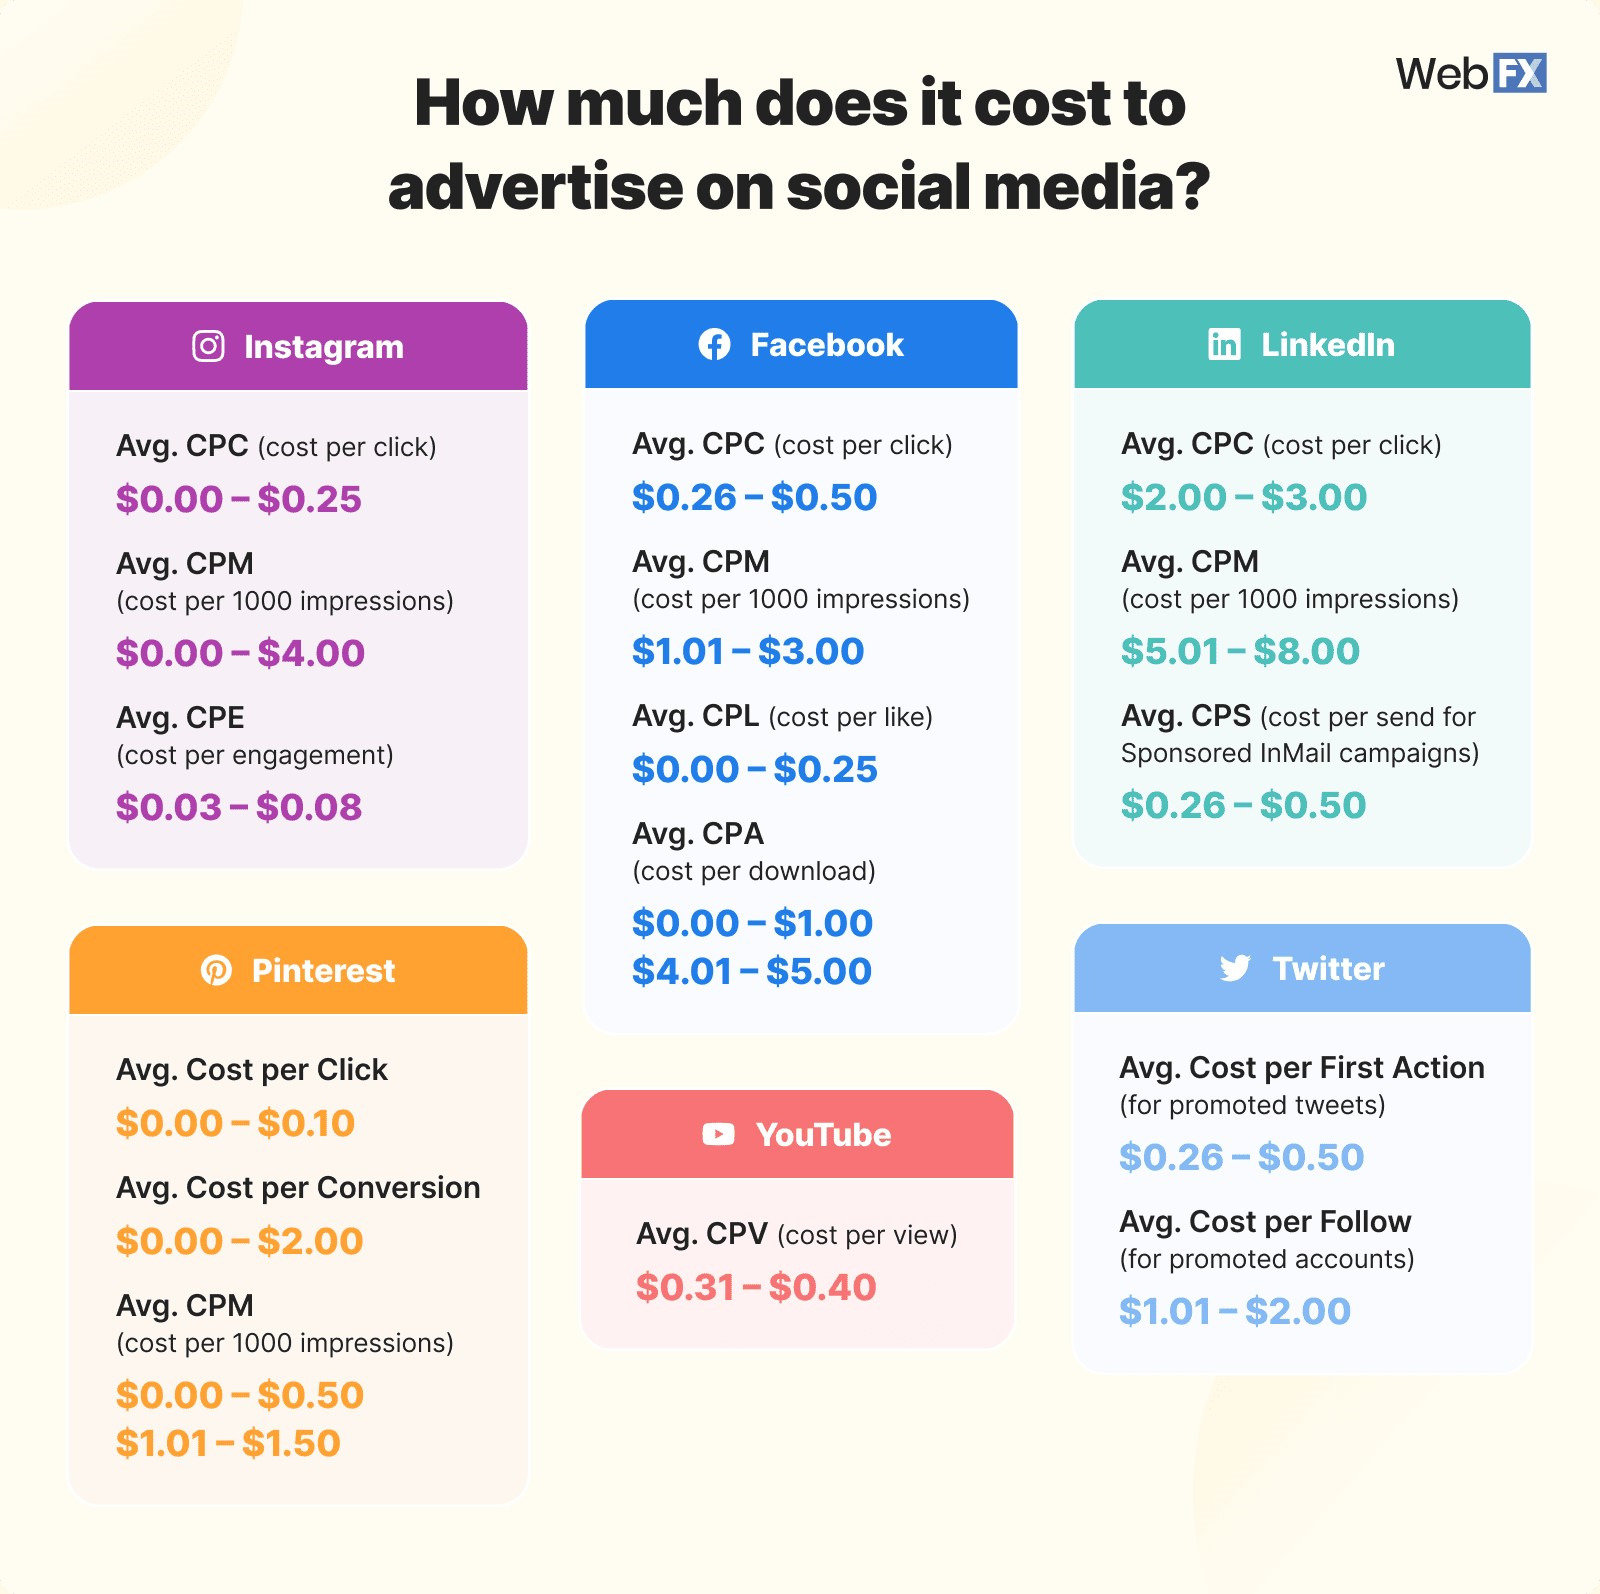 How much does it cost to advertise on social media